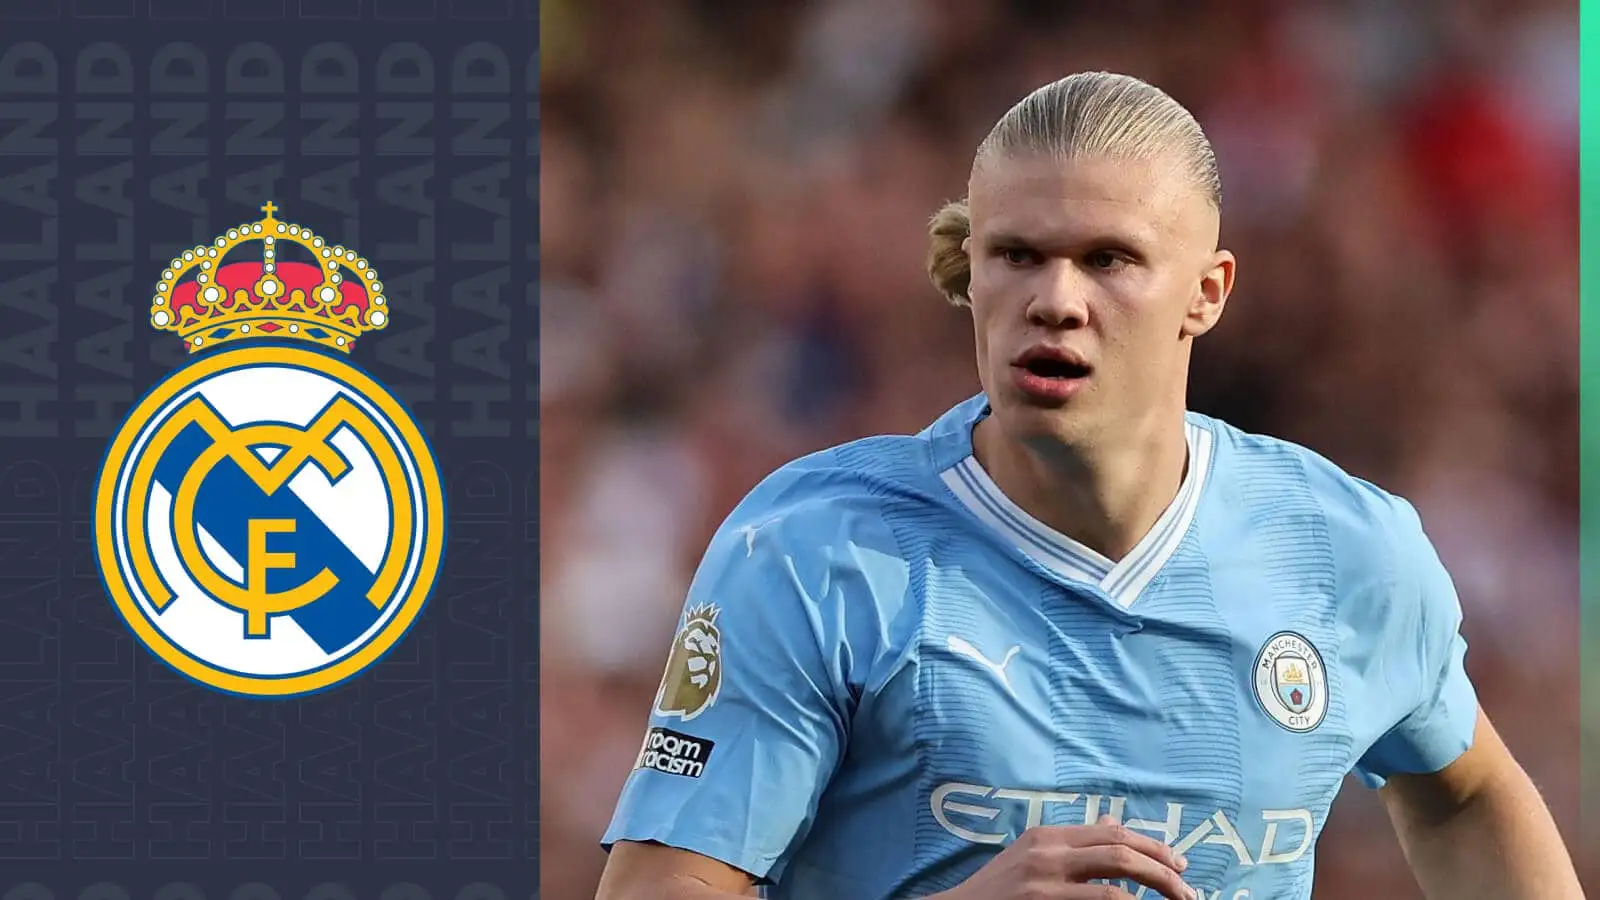 The Real Madrid badge and Manchester City striker Erling Haaland